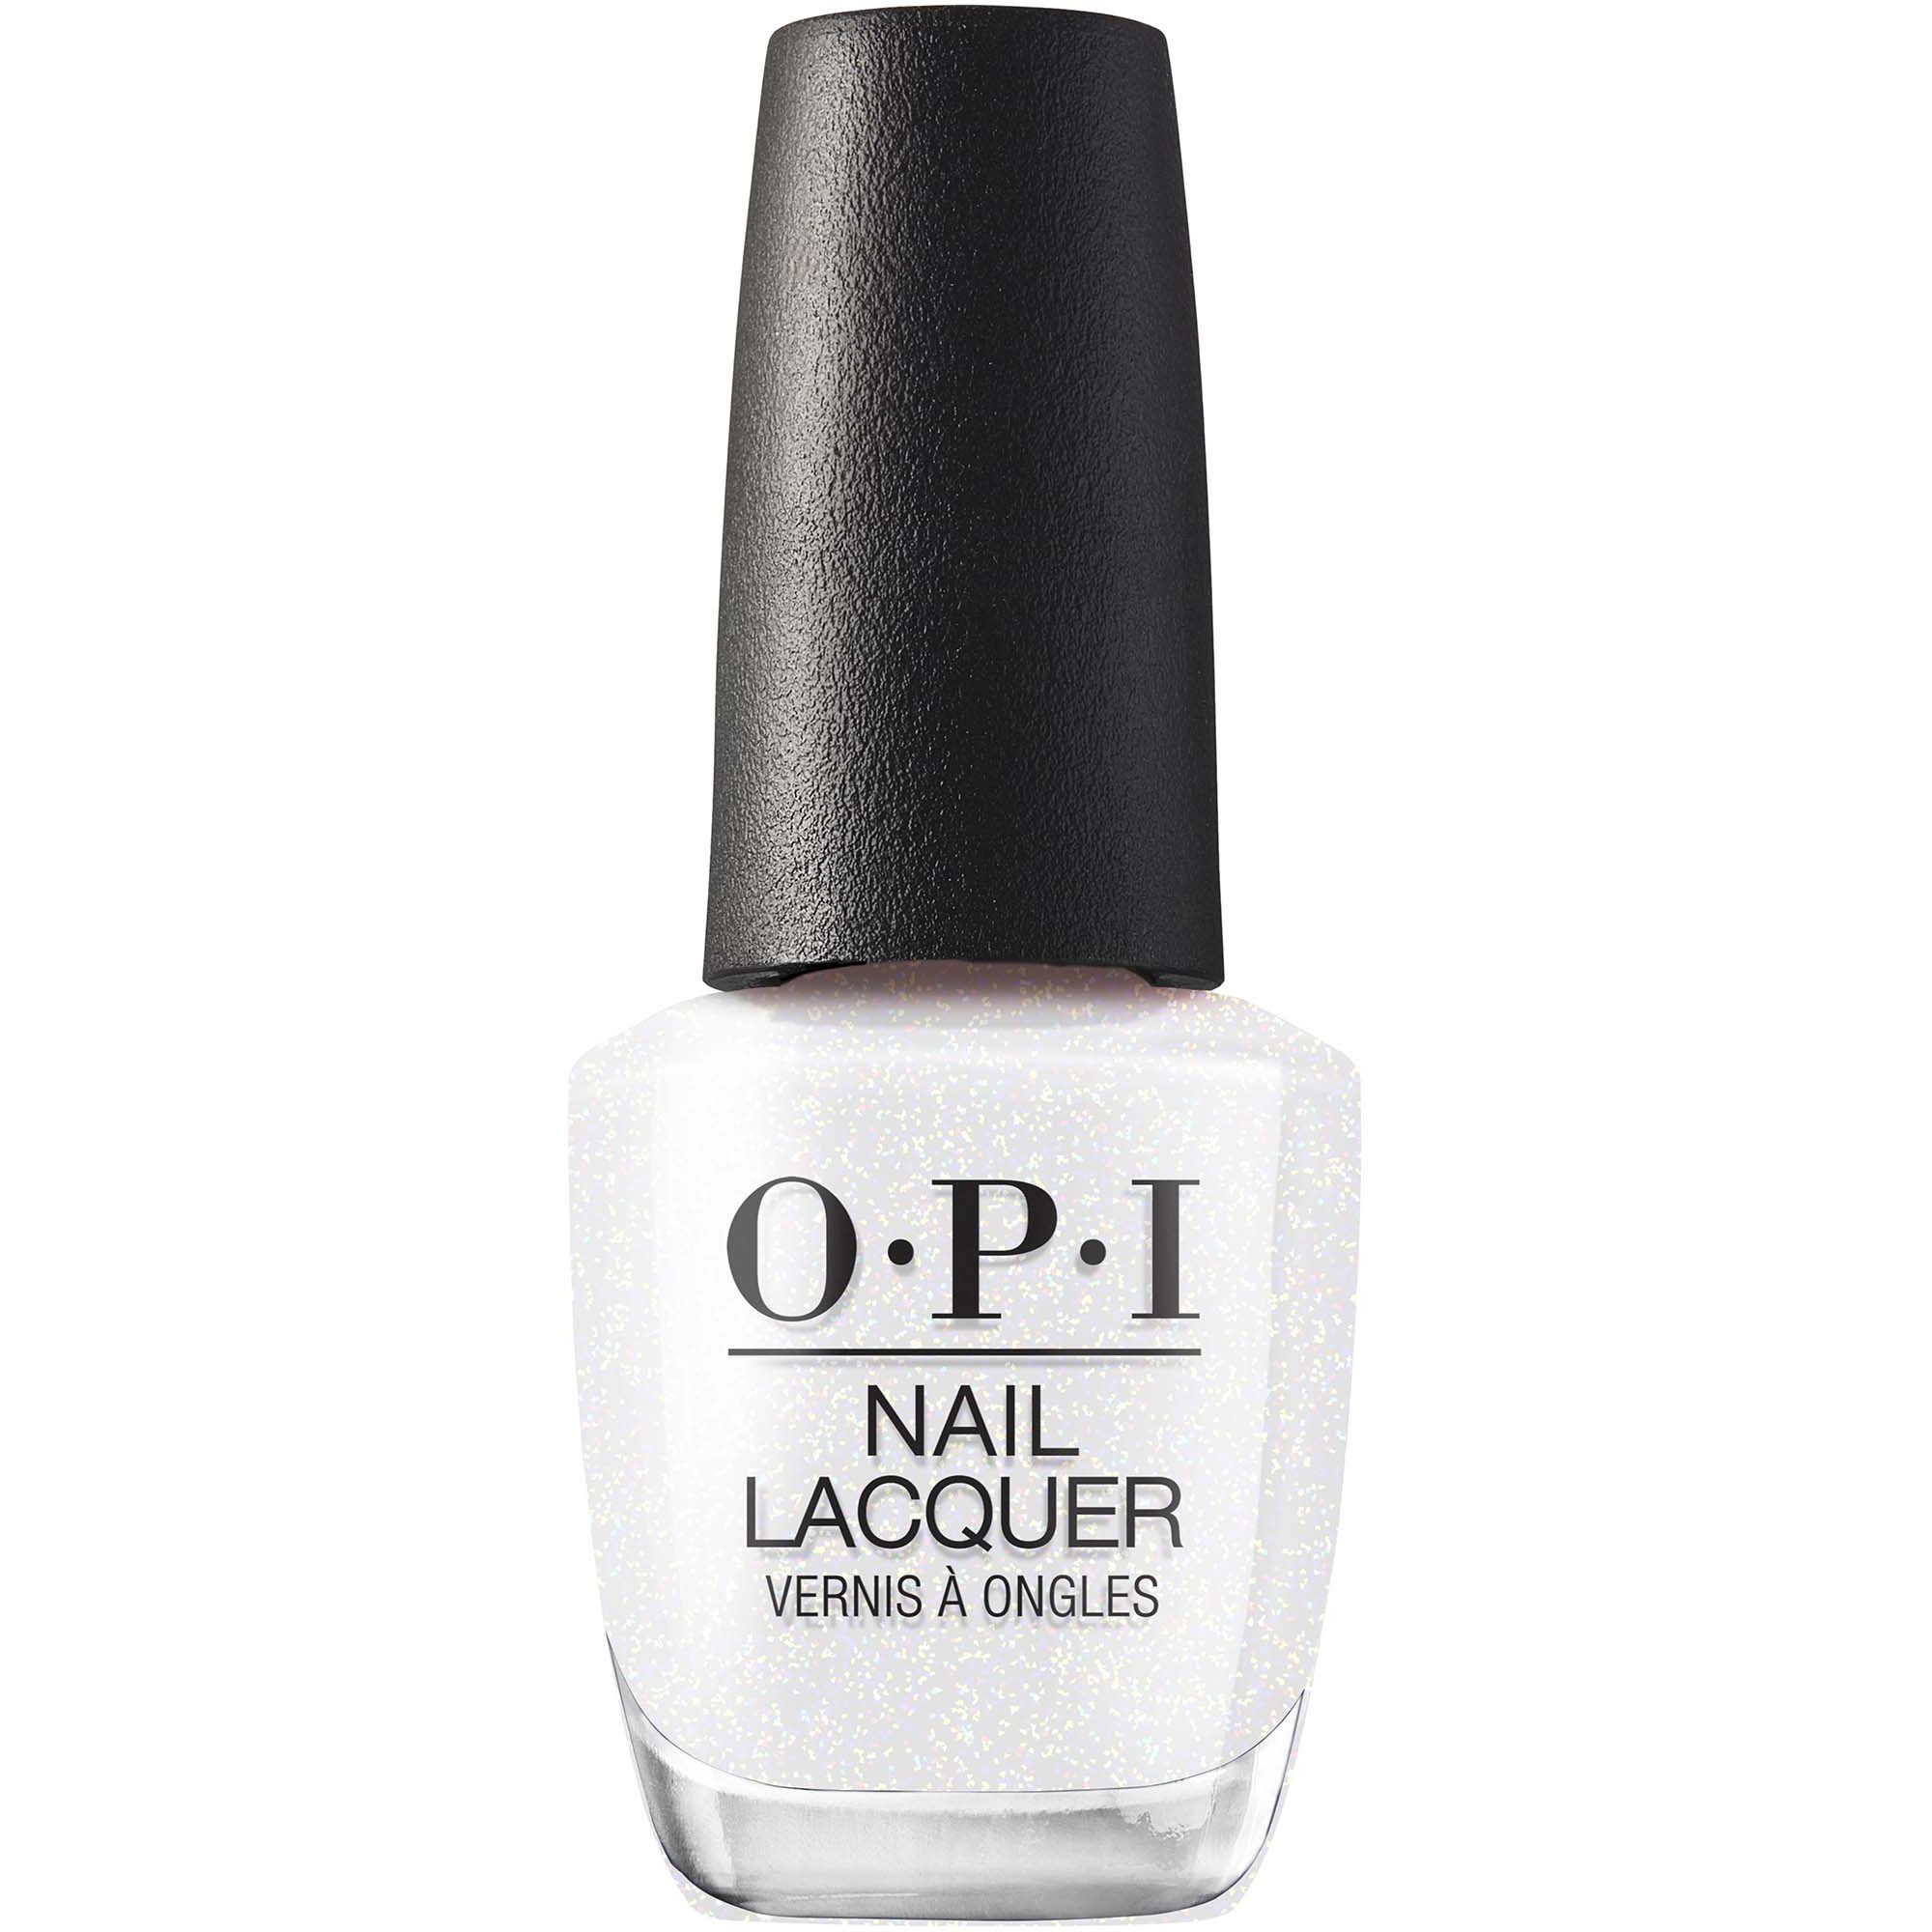 Opi Nail Lacquer Your Way Snatch'd - Silver